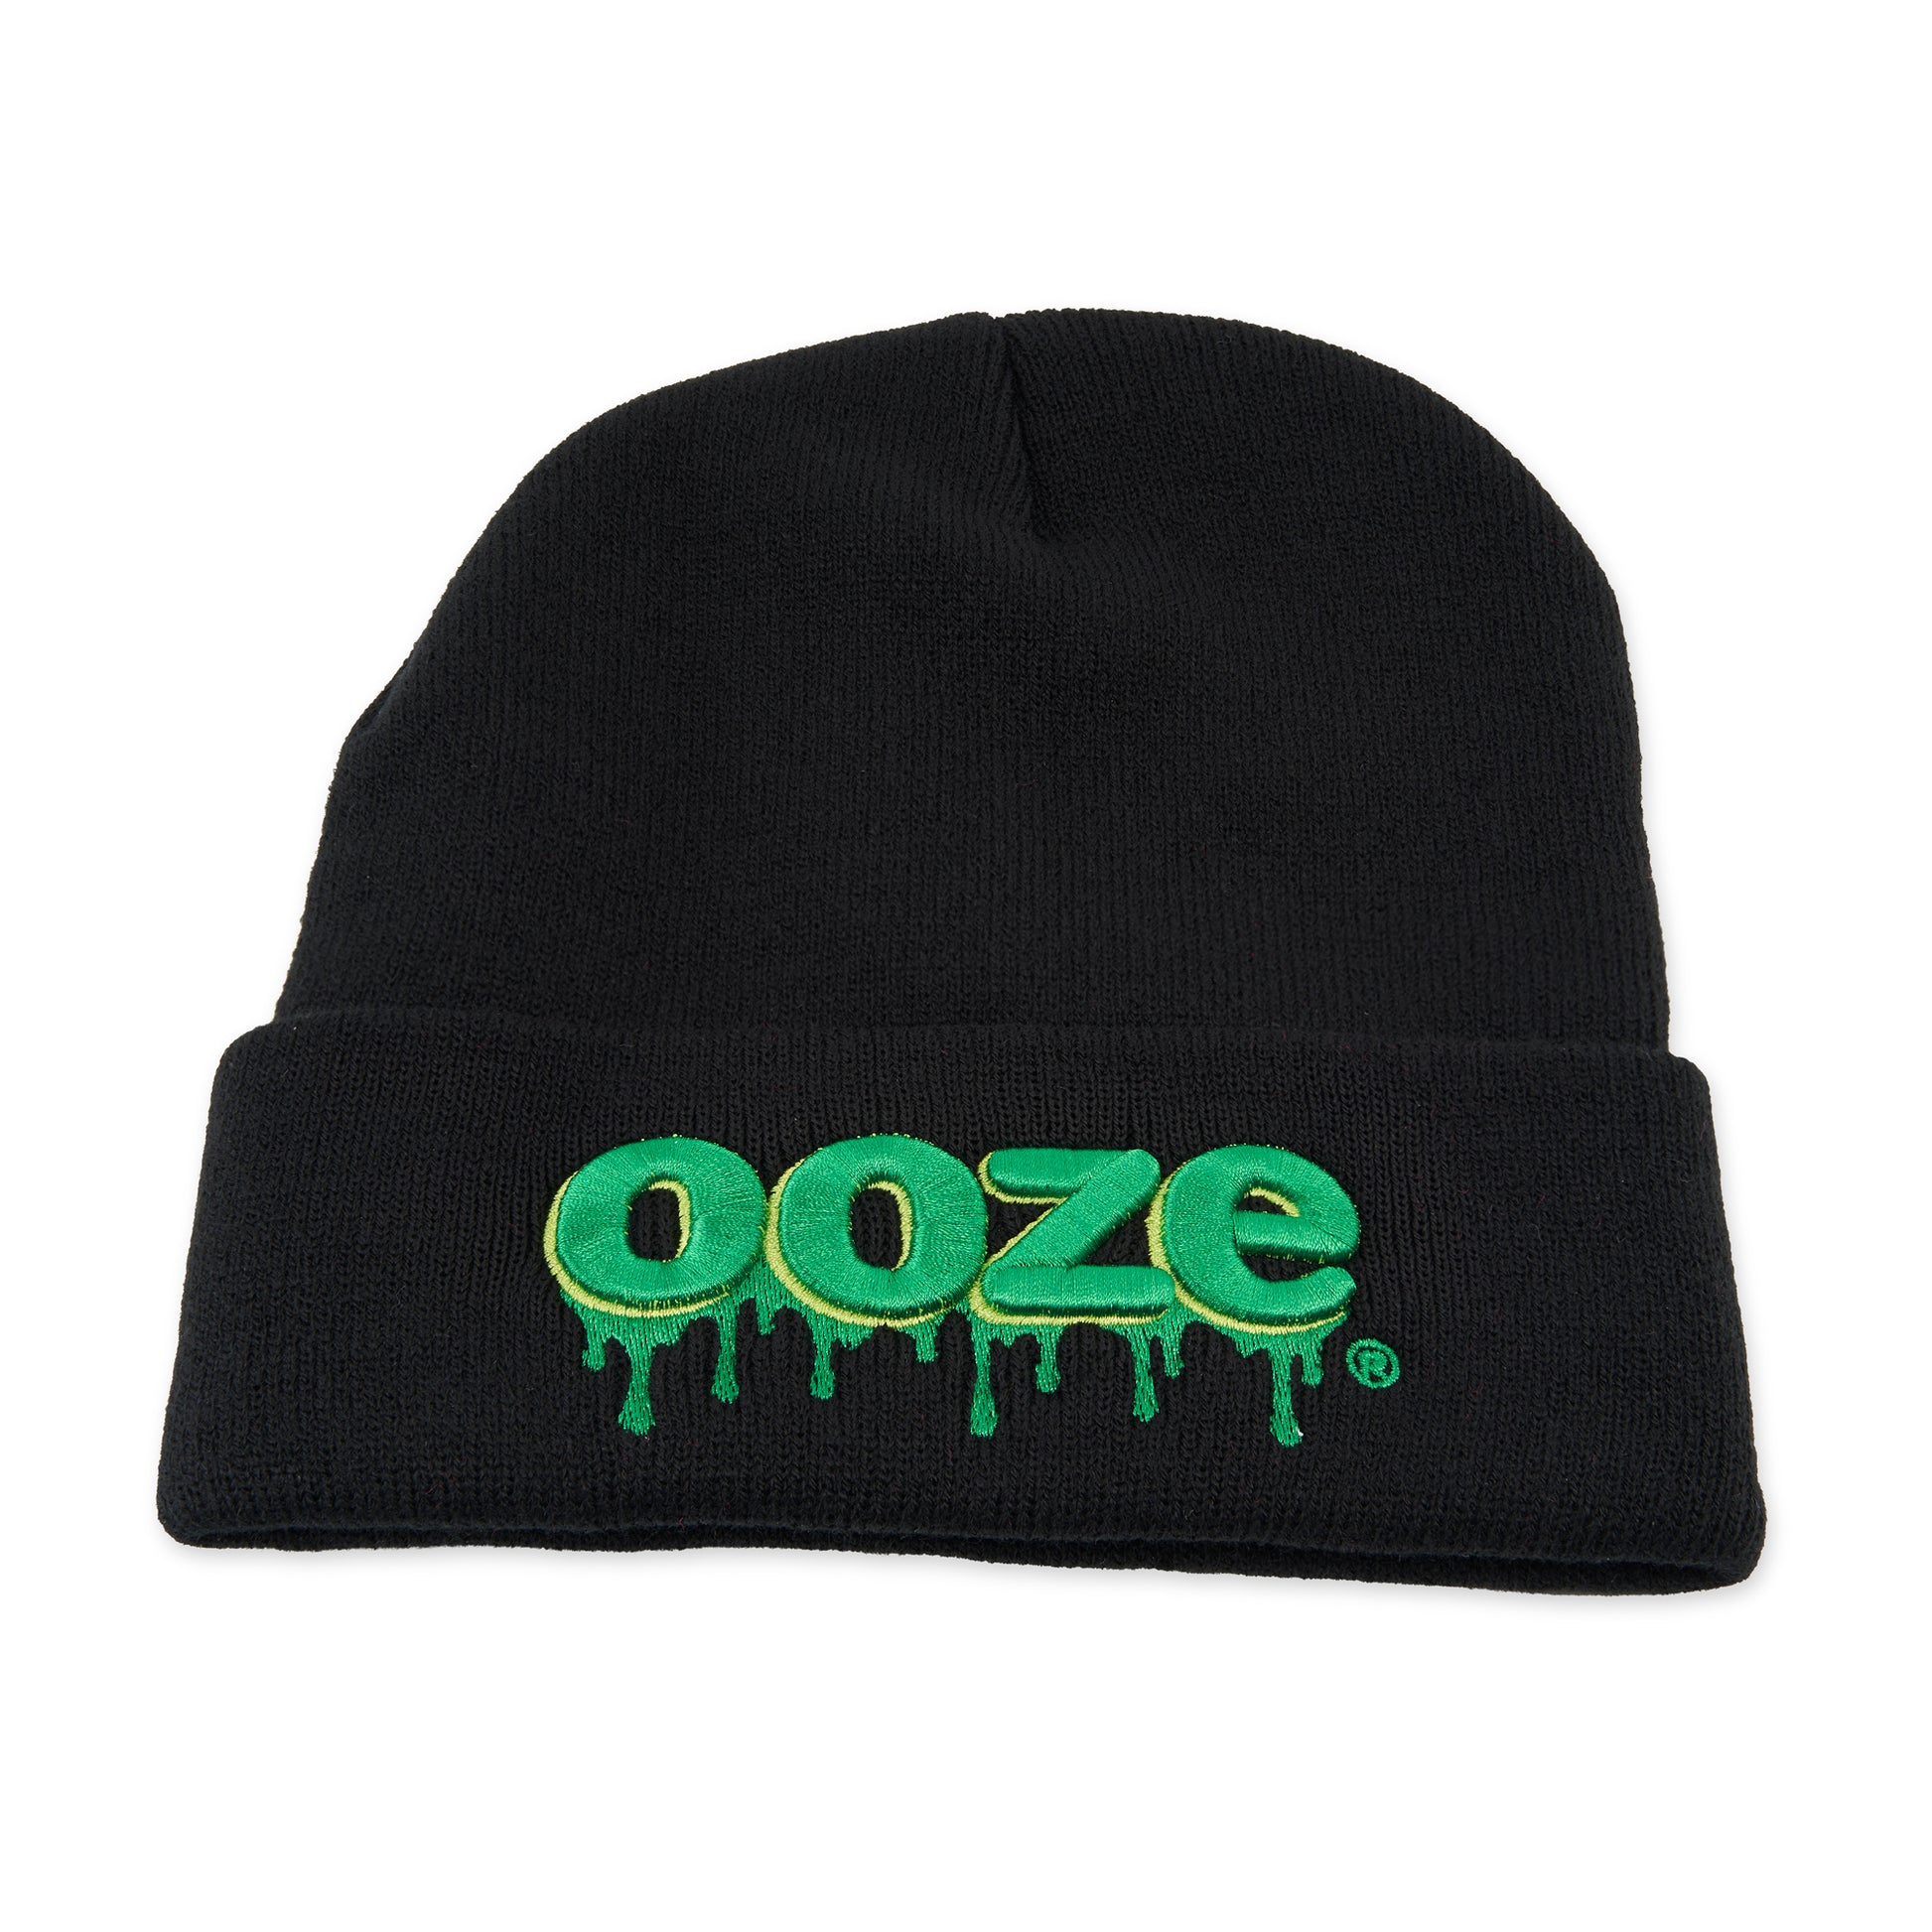 The black Ooze beanie is laid flat on a white background